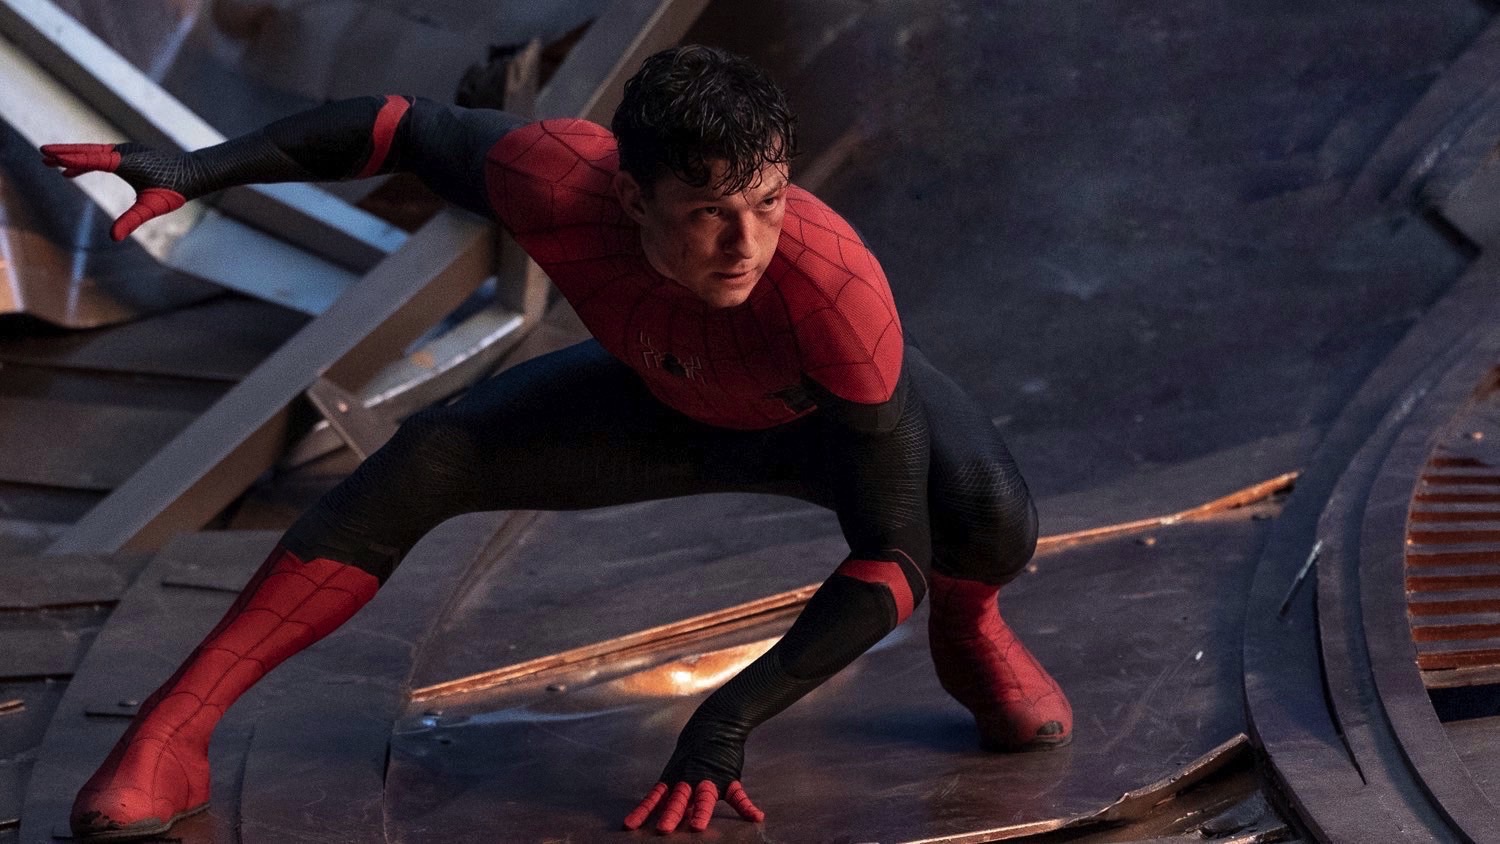 Spider-Man 4 is rumored to be released in 2024. Here’s how it relates to MCU Phase 5